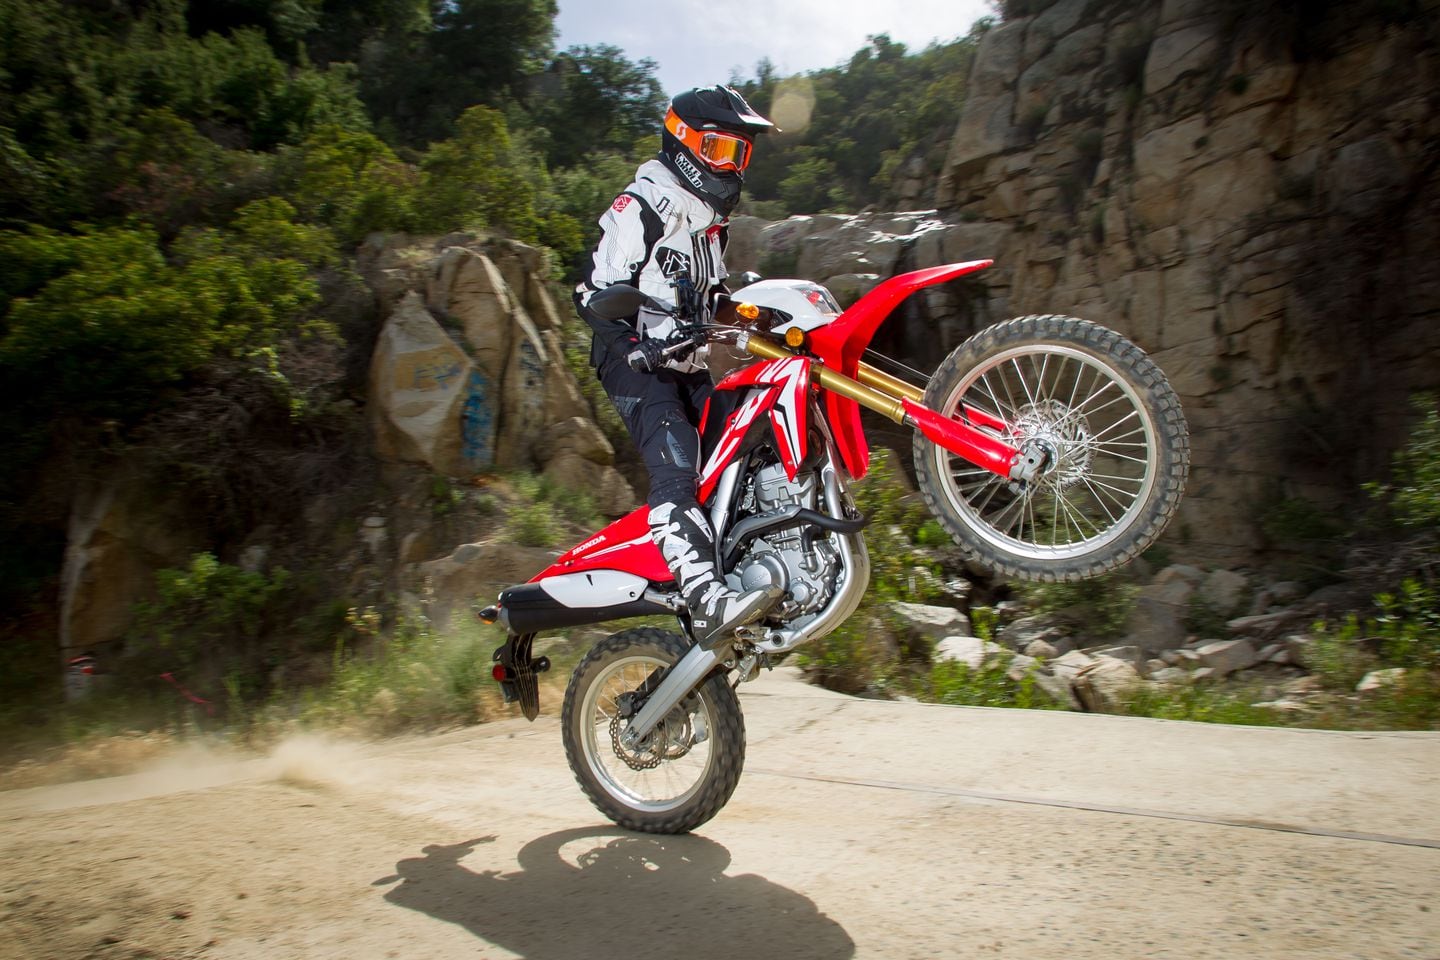 2017 Honda CRF250L and CRF250L Rally - FIRST RIDE REVIEW | Cycle World